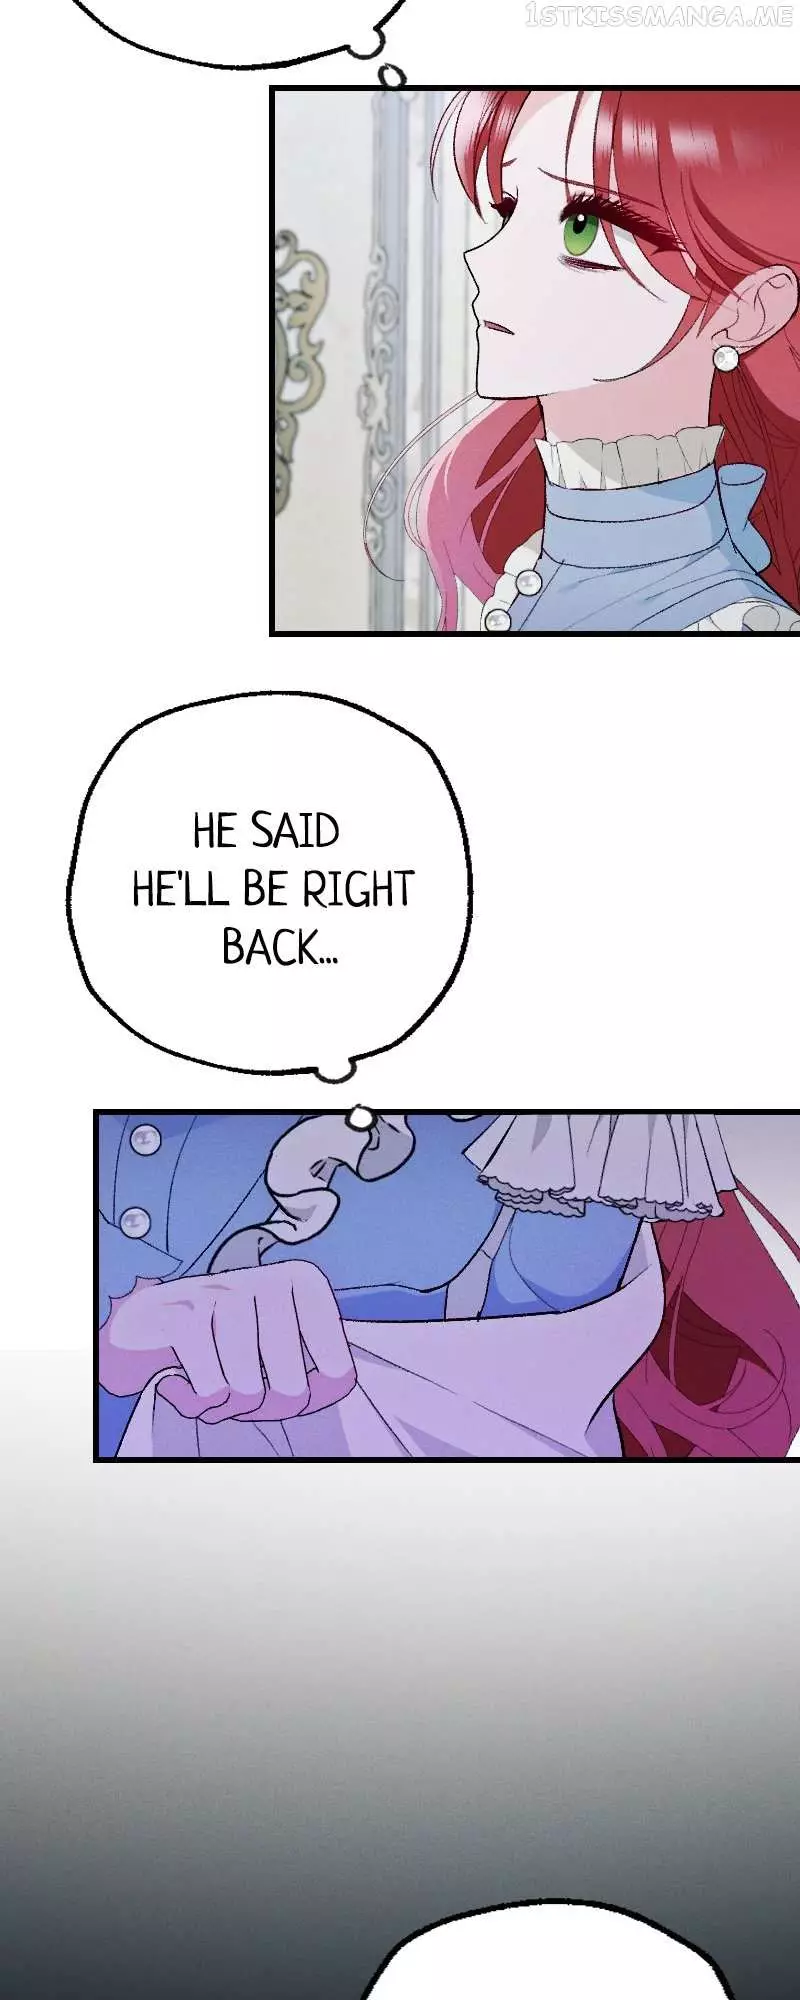 If You Wish For My Despair - 14 page 21-2147a5e6